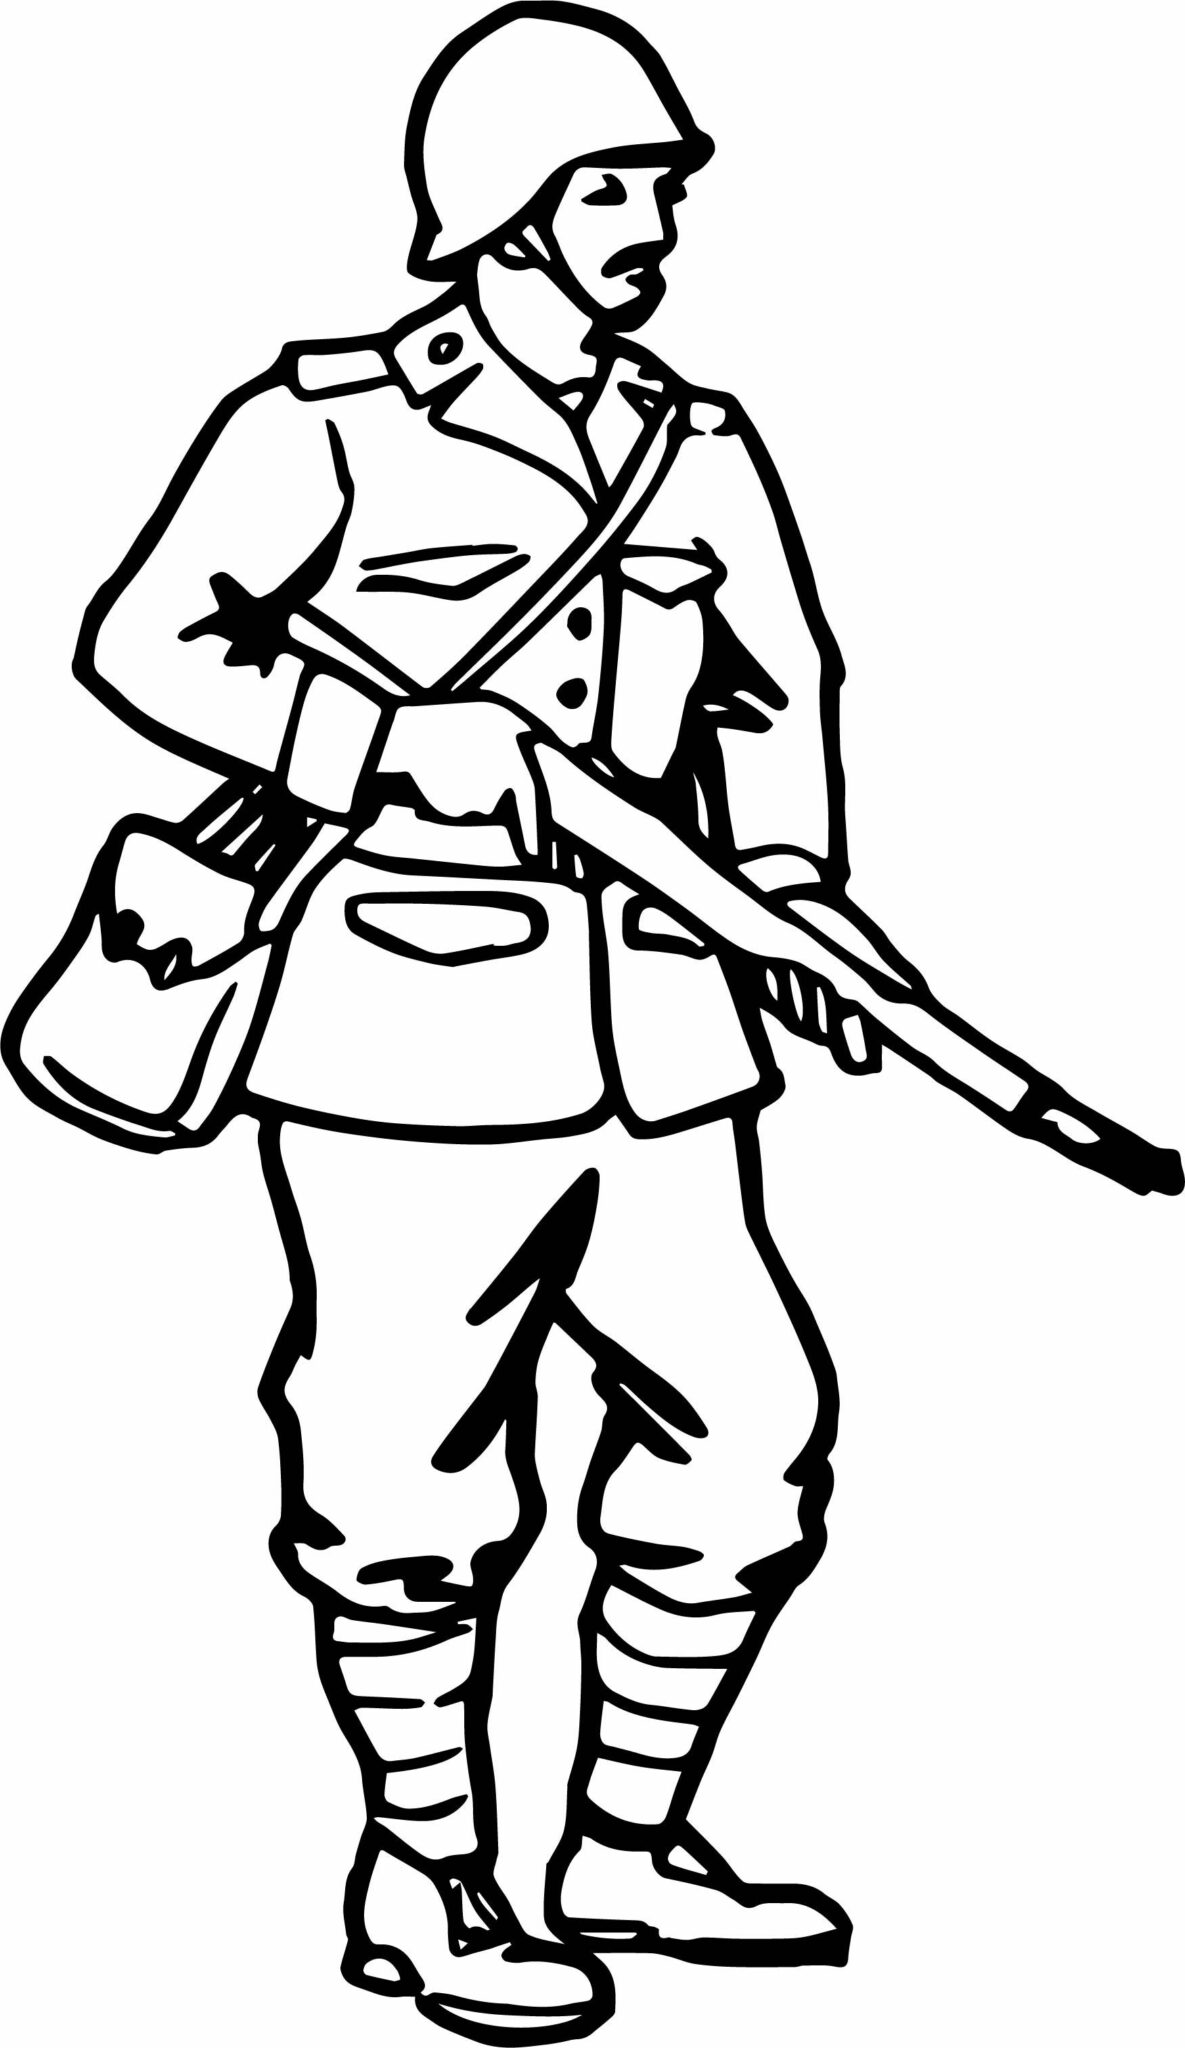 Free Soldier Coloring Pages Pdf To Print - Coloringfolder.com